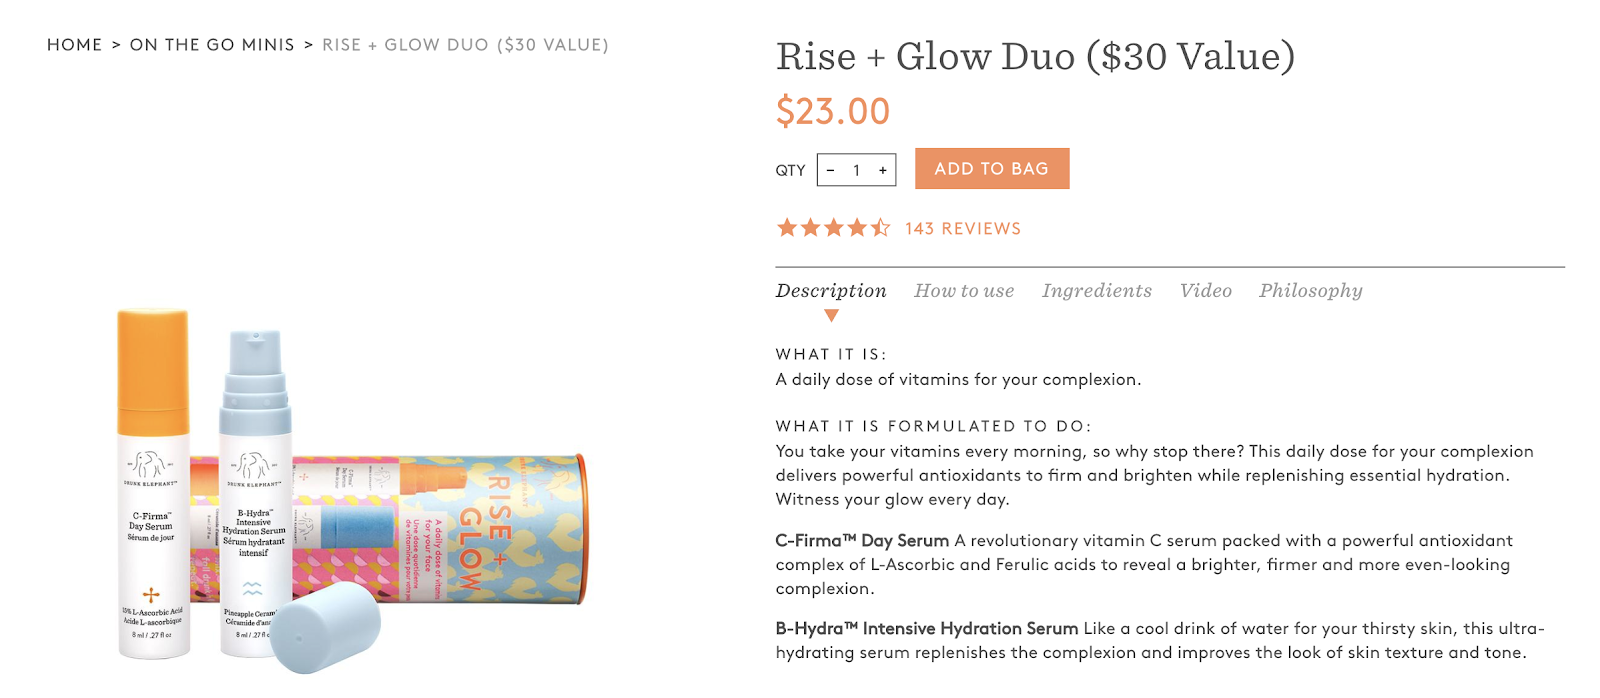 Drunk Elephant’s Rise and Glow Duo product detail page.